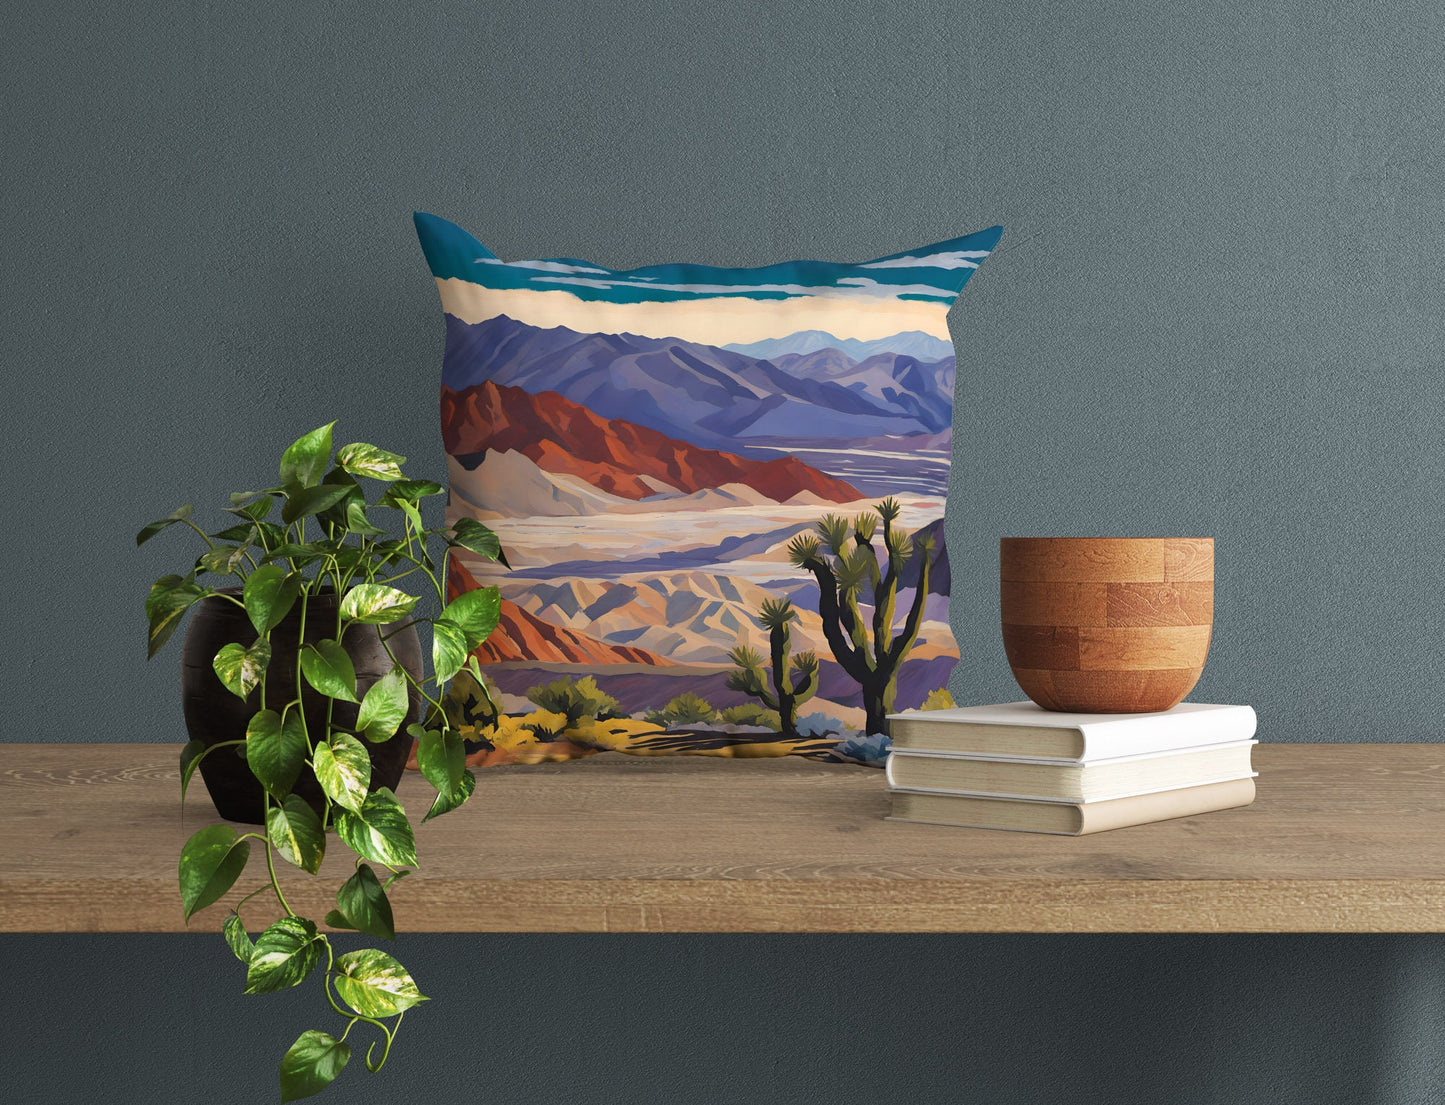 Dante'S View In Death Valley National Park, California Throw Pillow Cover, Usa Travel Pillow, Fashion, Pillow Covers 20X20, Playroom Decor